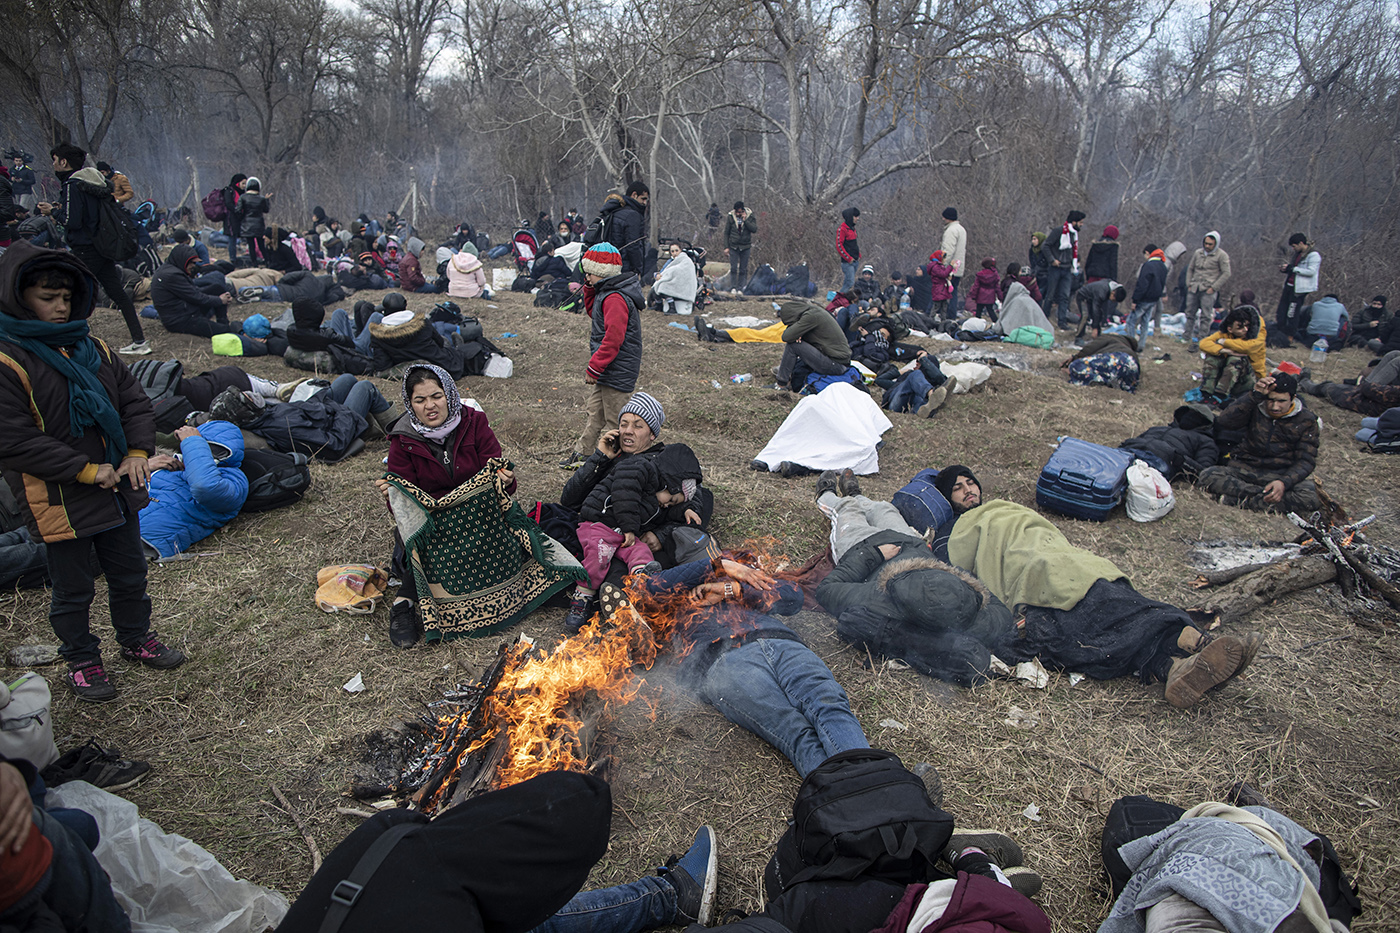 efugees have some rest before attempting to pass the Turkish-Greek border and try to enter Europe, Edirne, Turkey, 29 February 2020. 